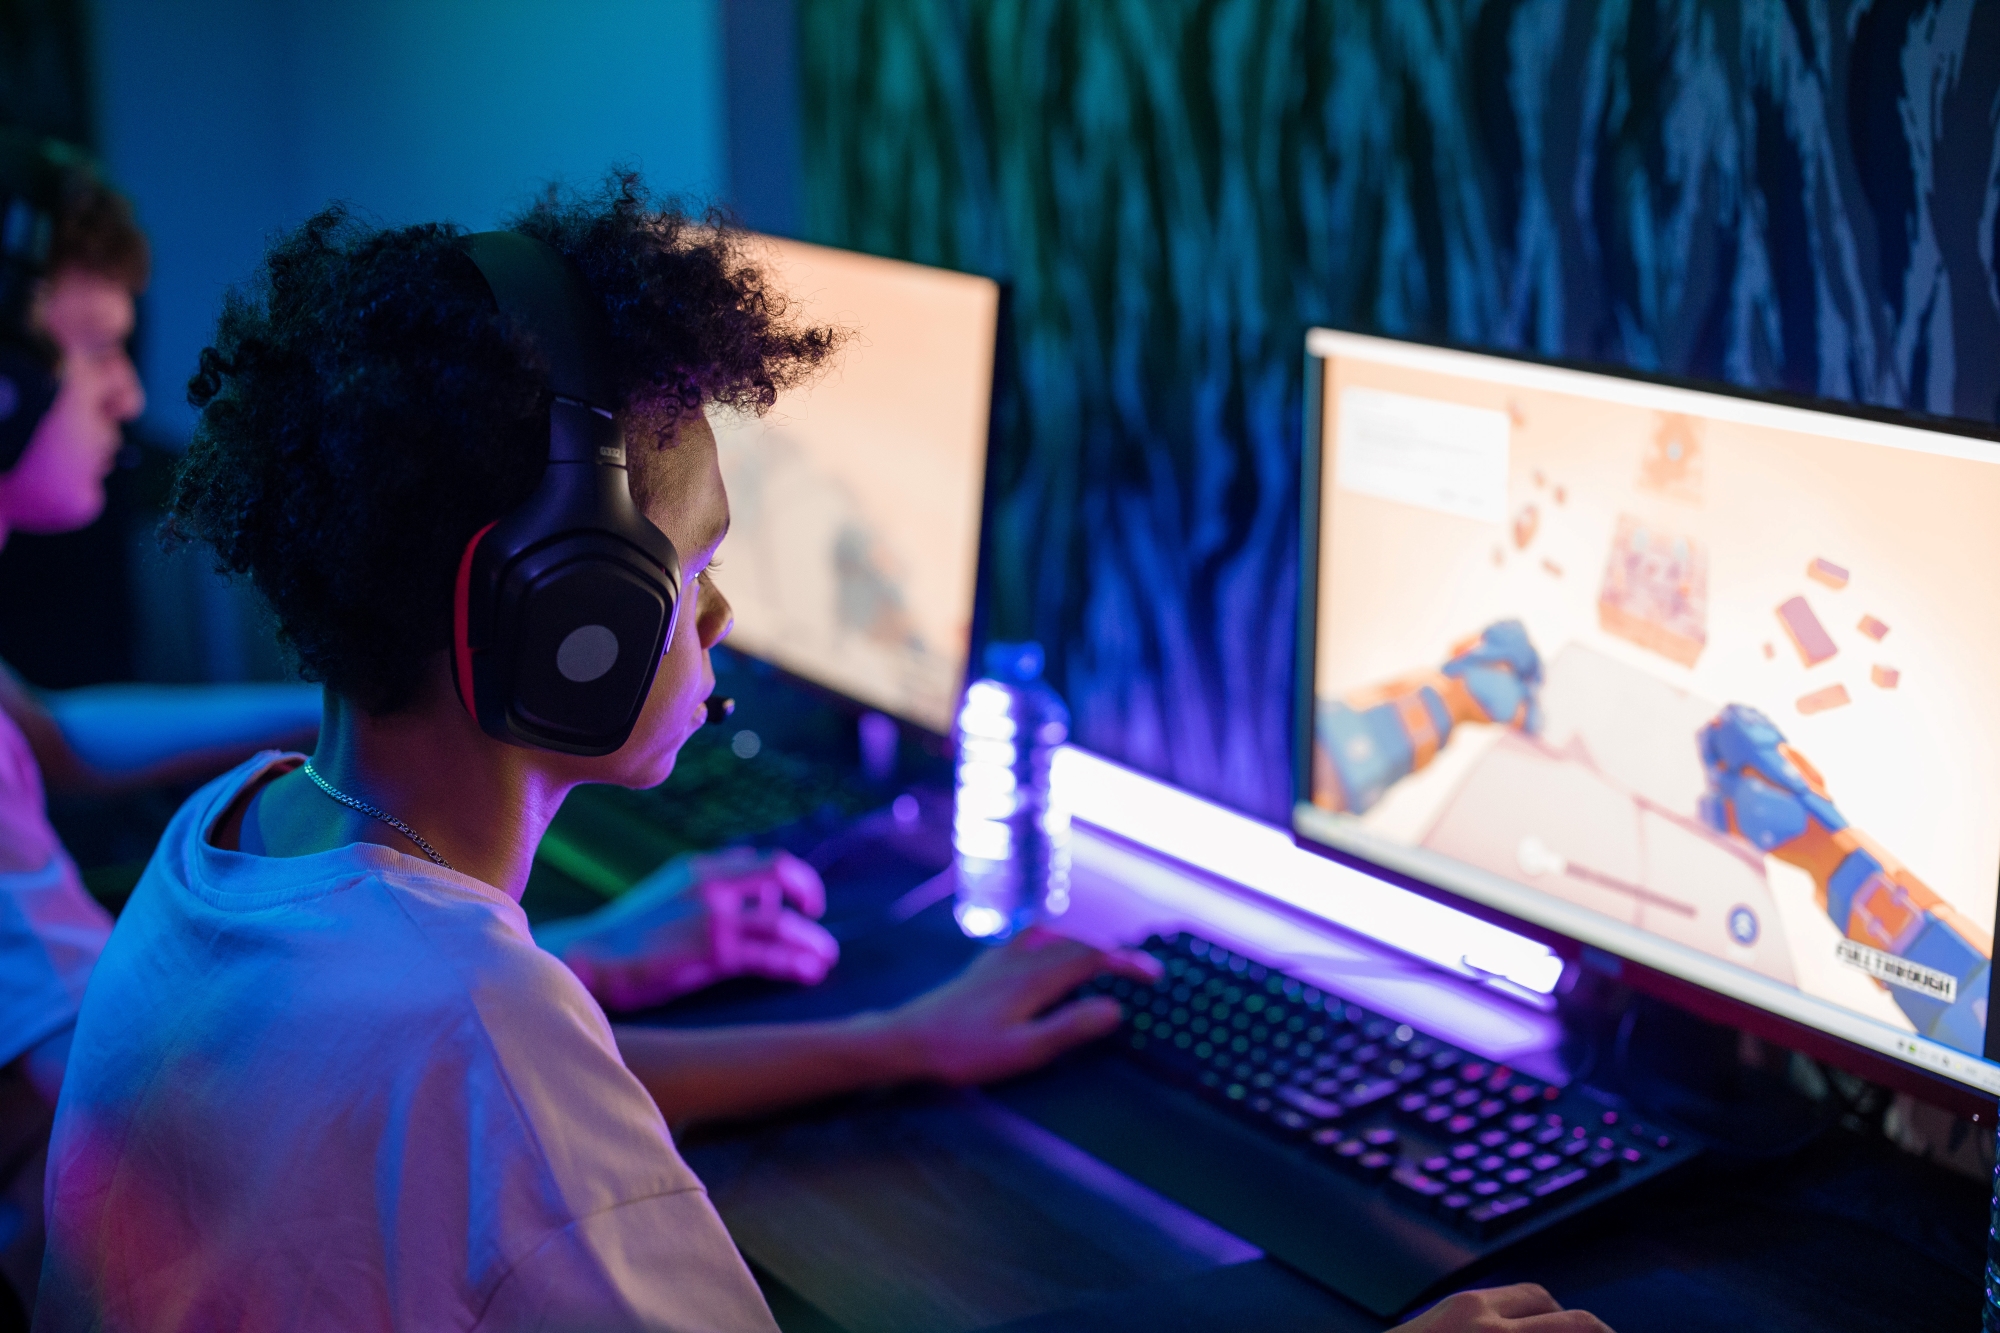 Little boy playing video games in the dark with a headset on